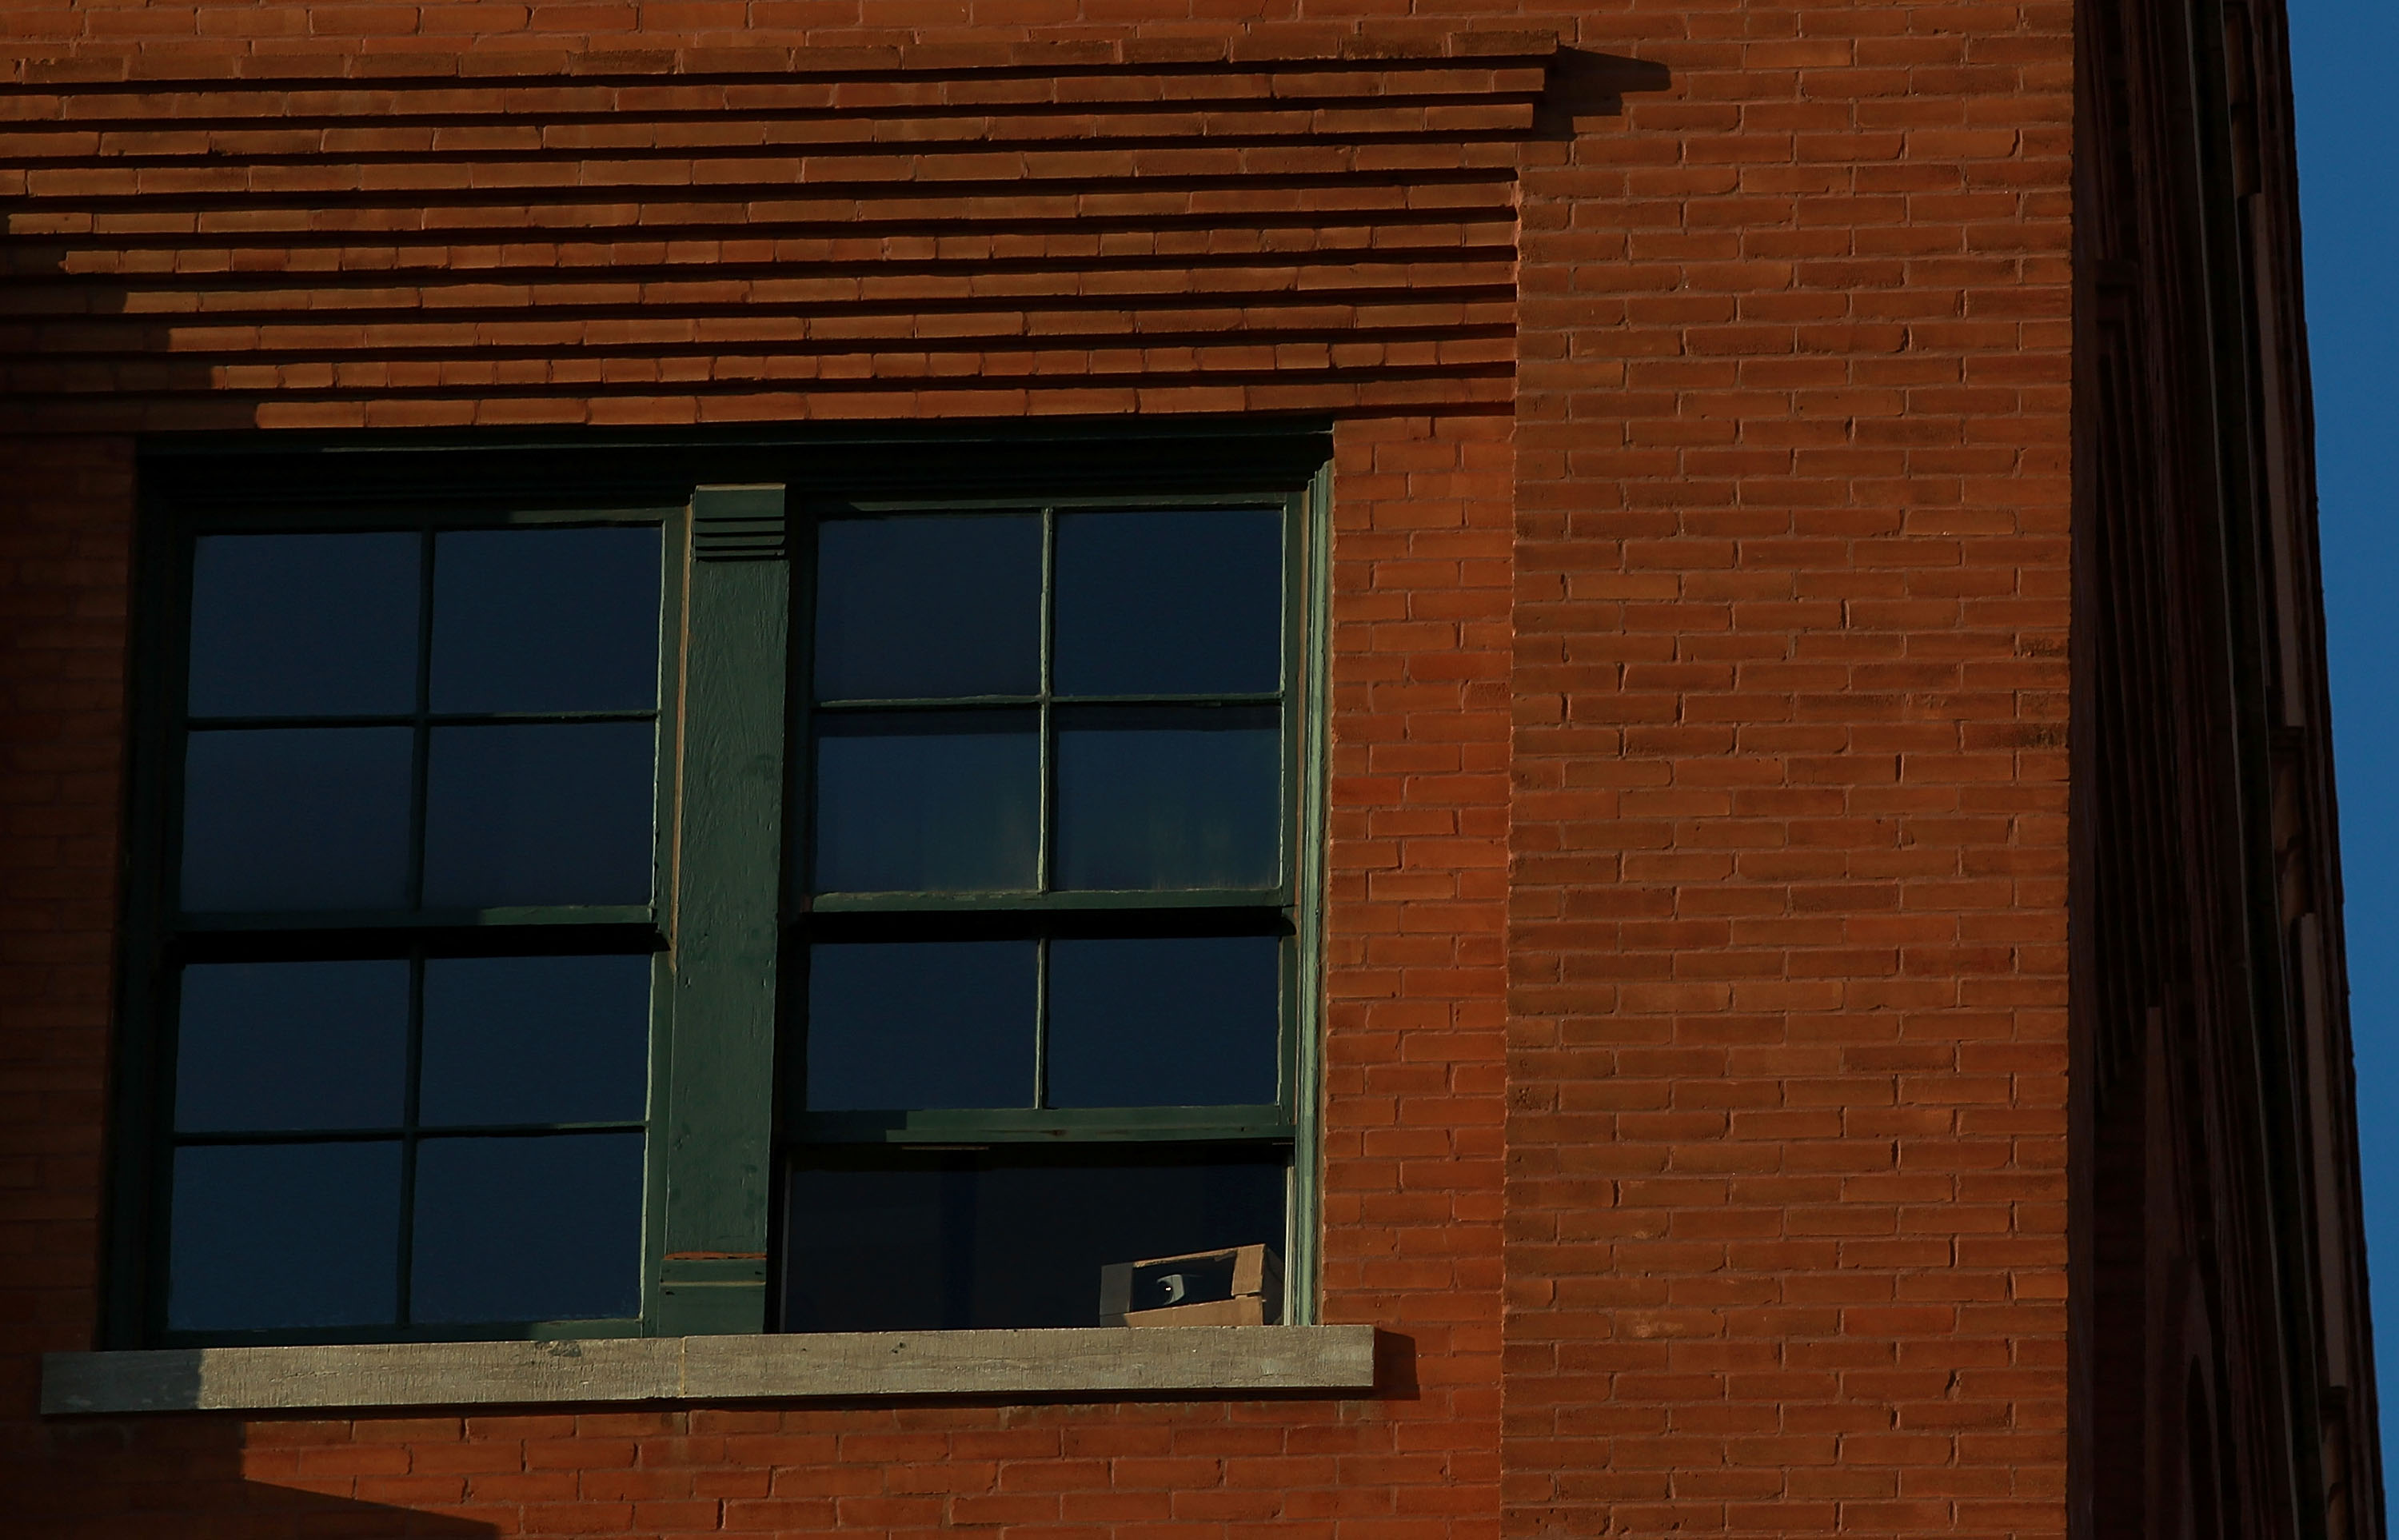 6th Floor Window of Texas Book Depository (Source: Getty Images)